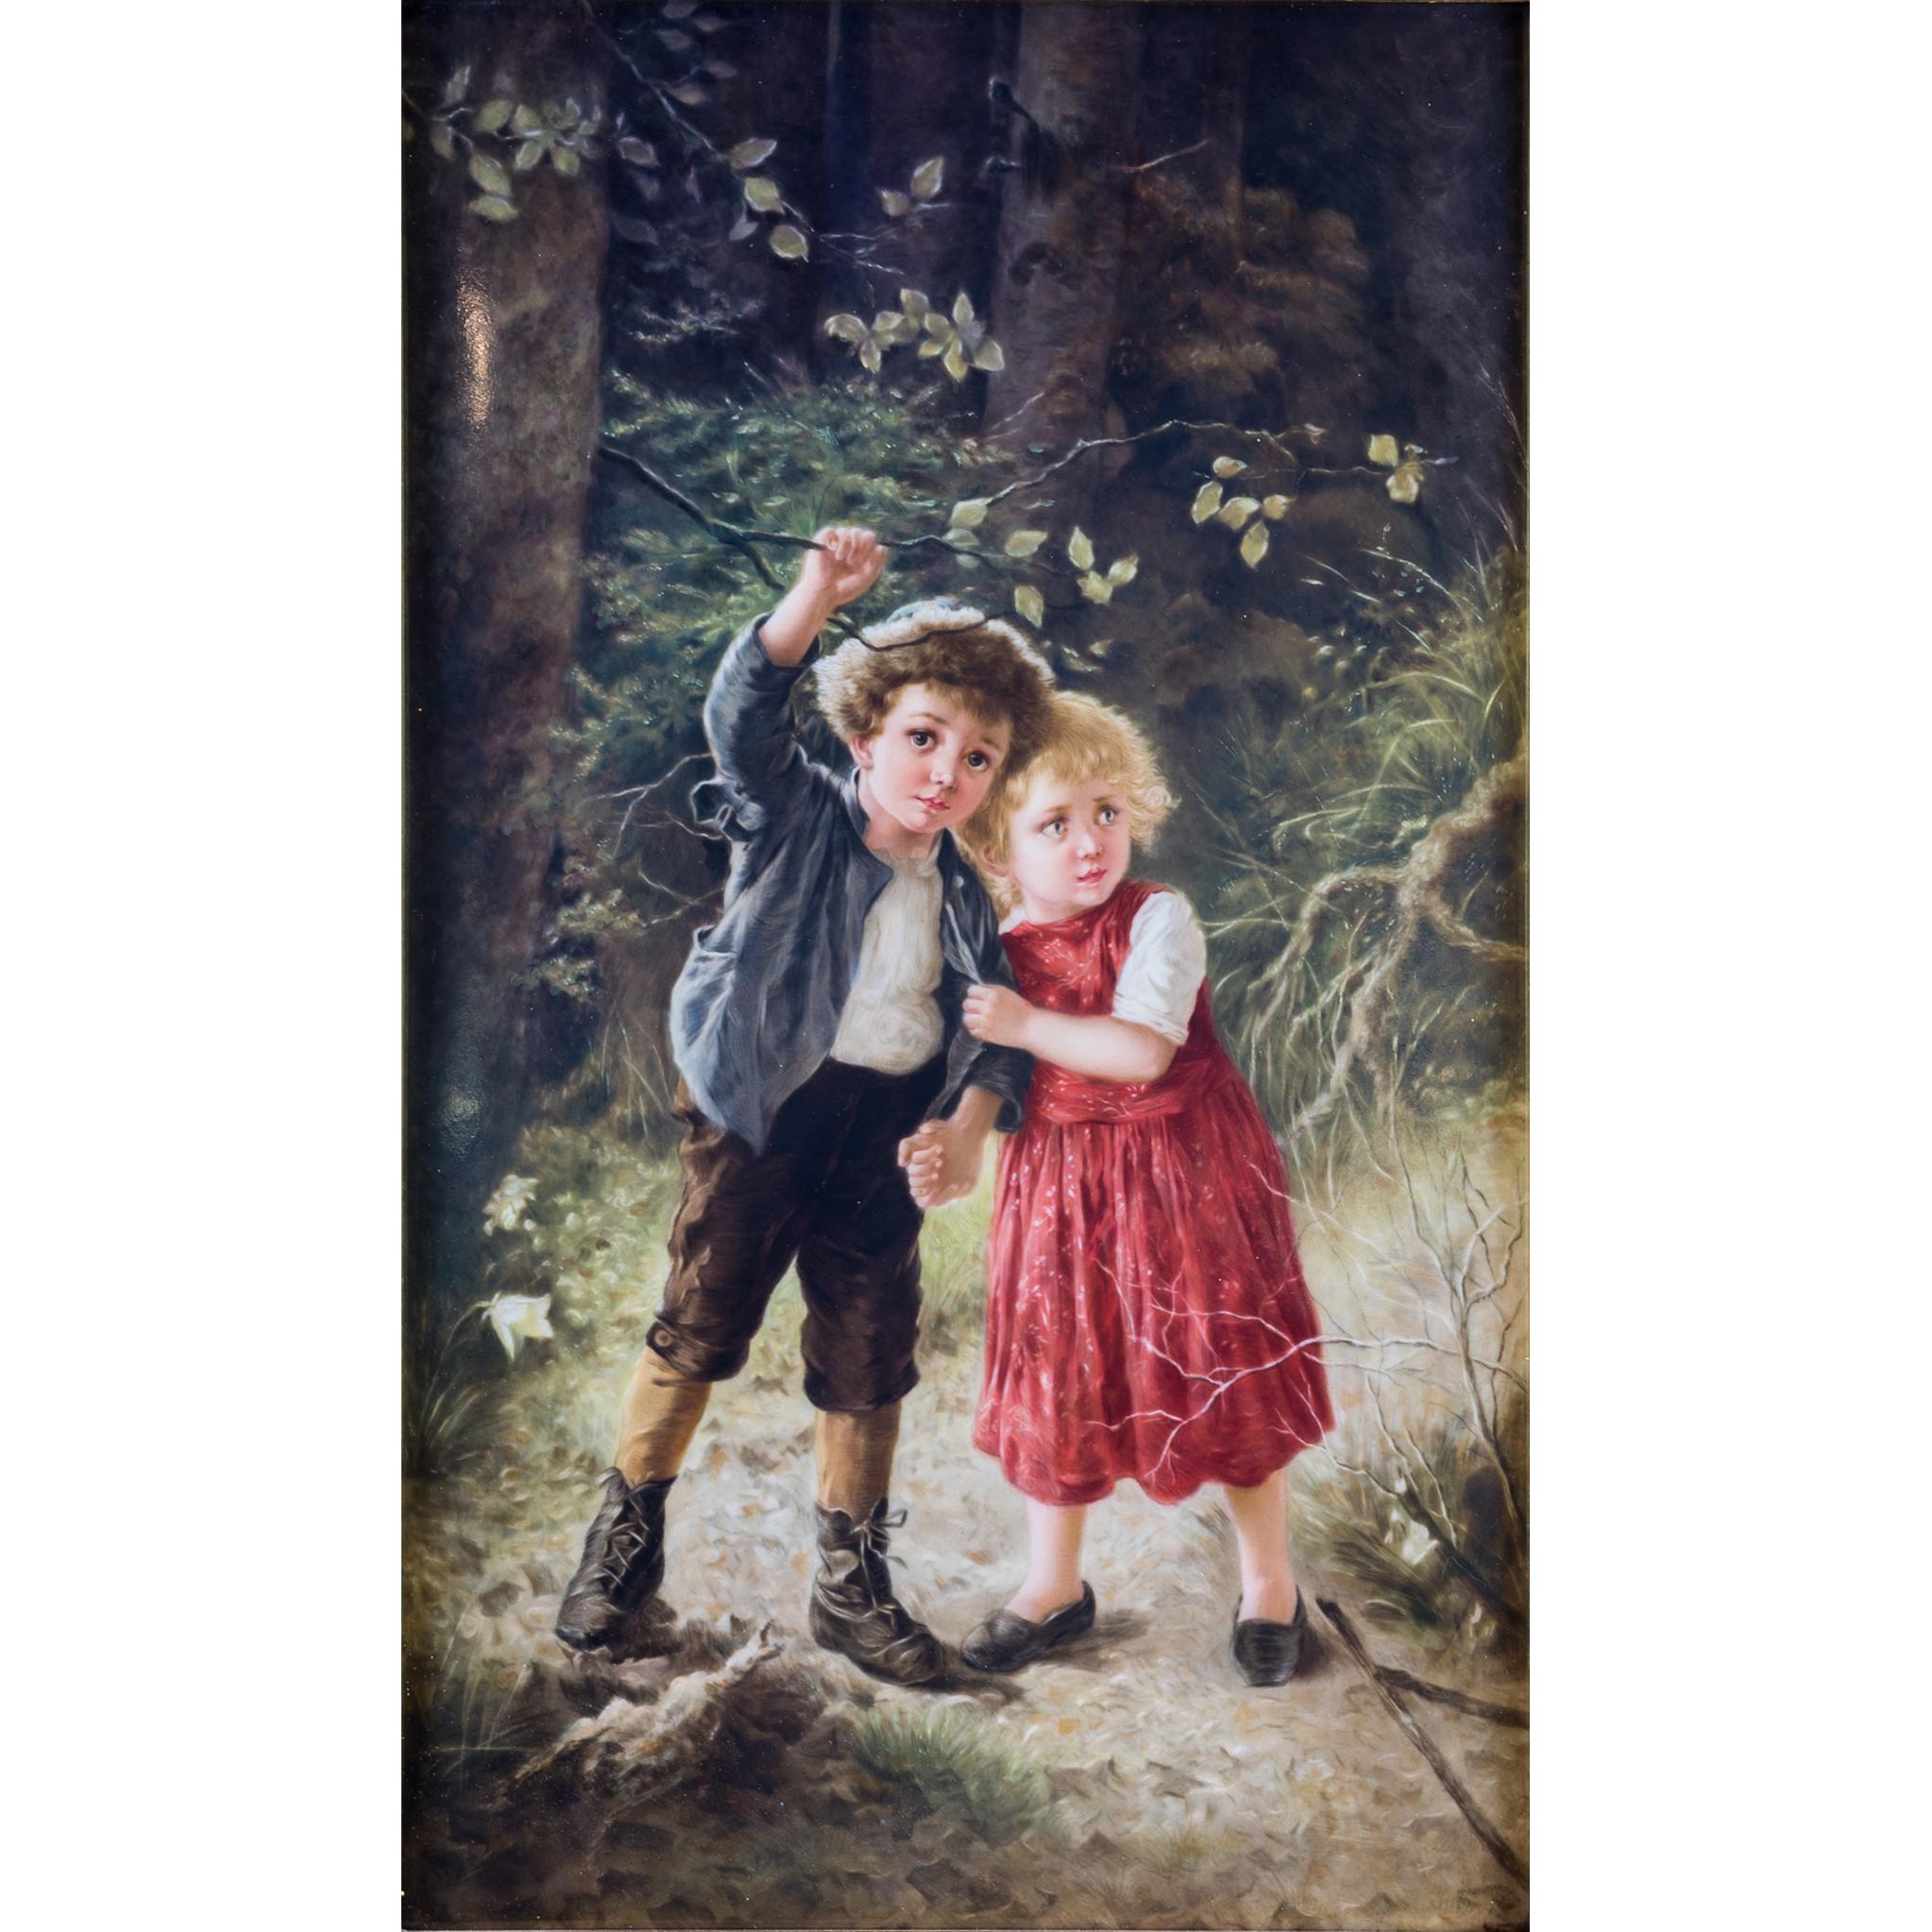 The rectangular plaque hand-painted depicting two children lost in a thick german forest.

Origin: German
Date: 19th century
Dimension: (Plaque) 13 in. x 8 in.; (framed) 19 1/2 in. x 14 1/2 in.